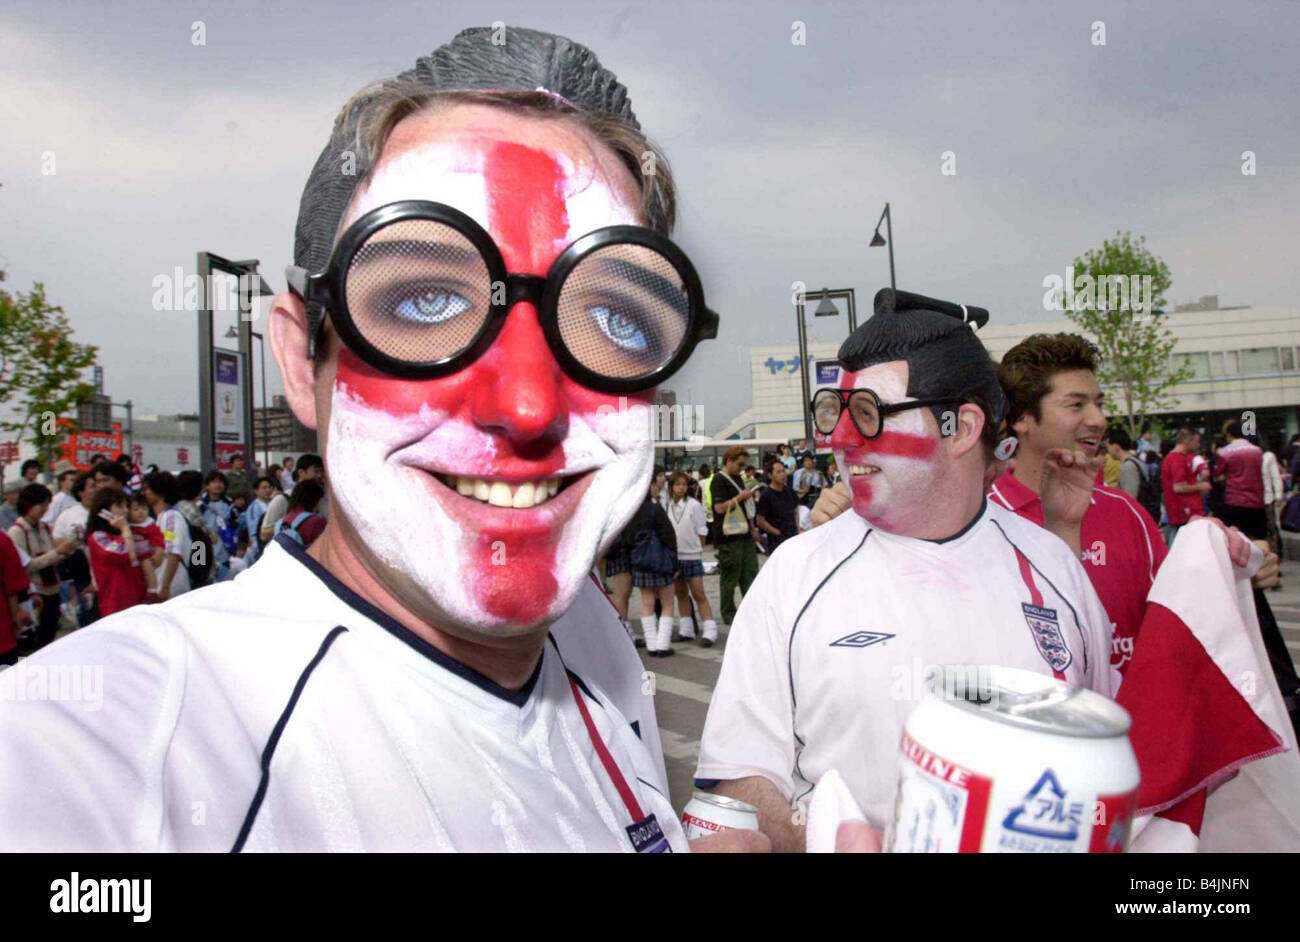 England Football Fans Supporters June 2002 Pictured celebrating after win against Argentina England fans dressed as Japanese at Stock Photo